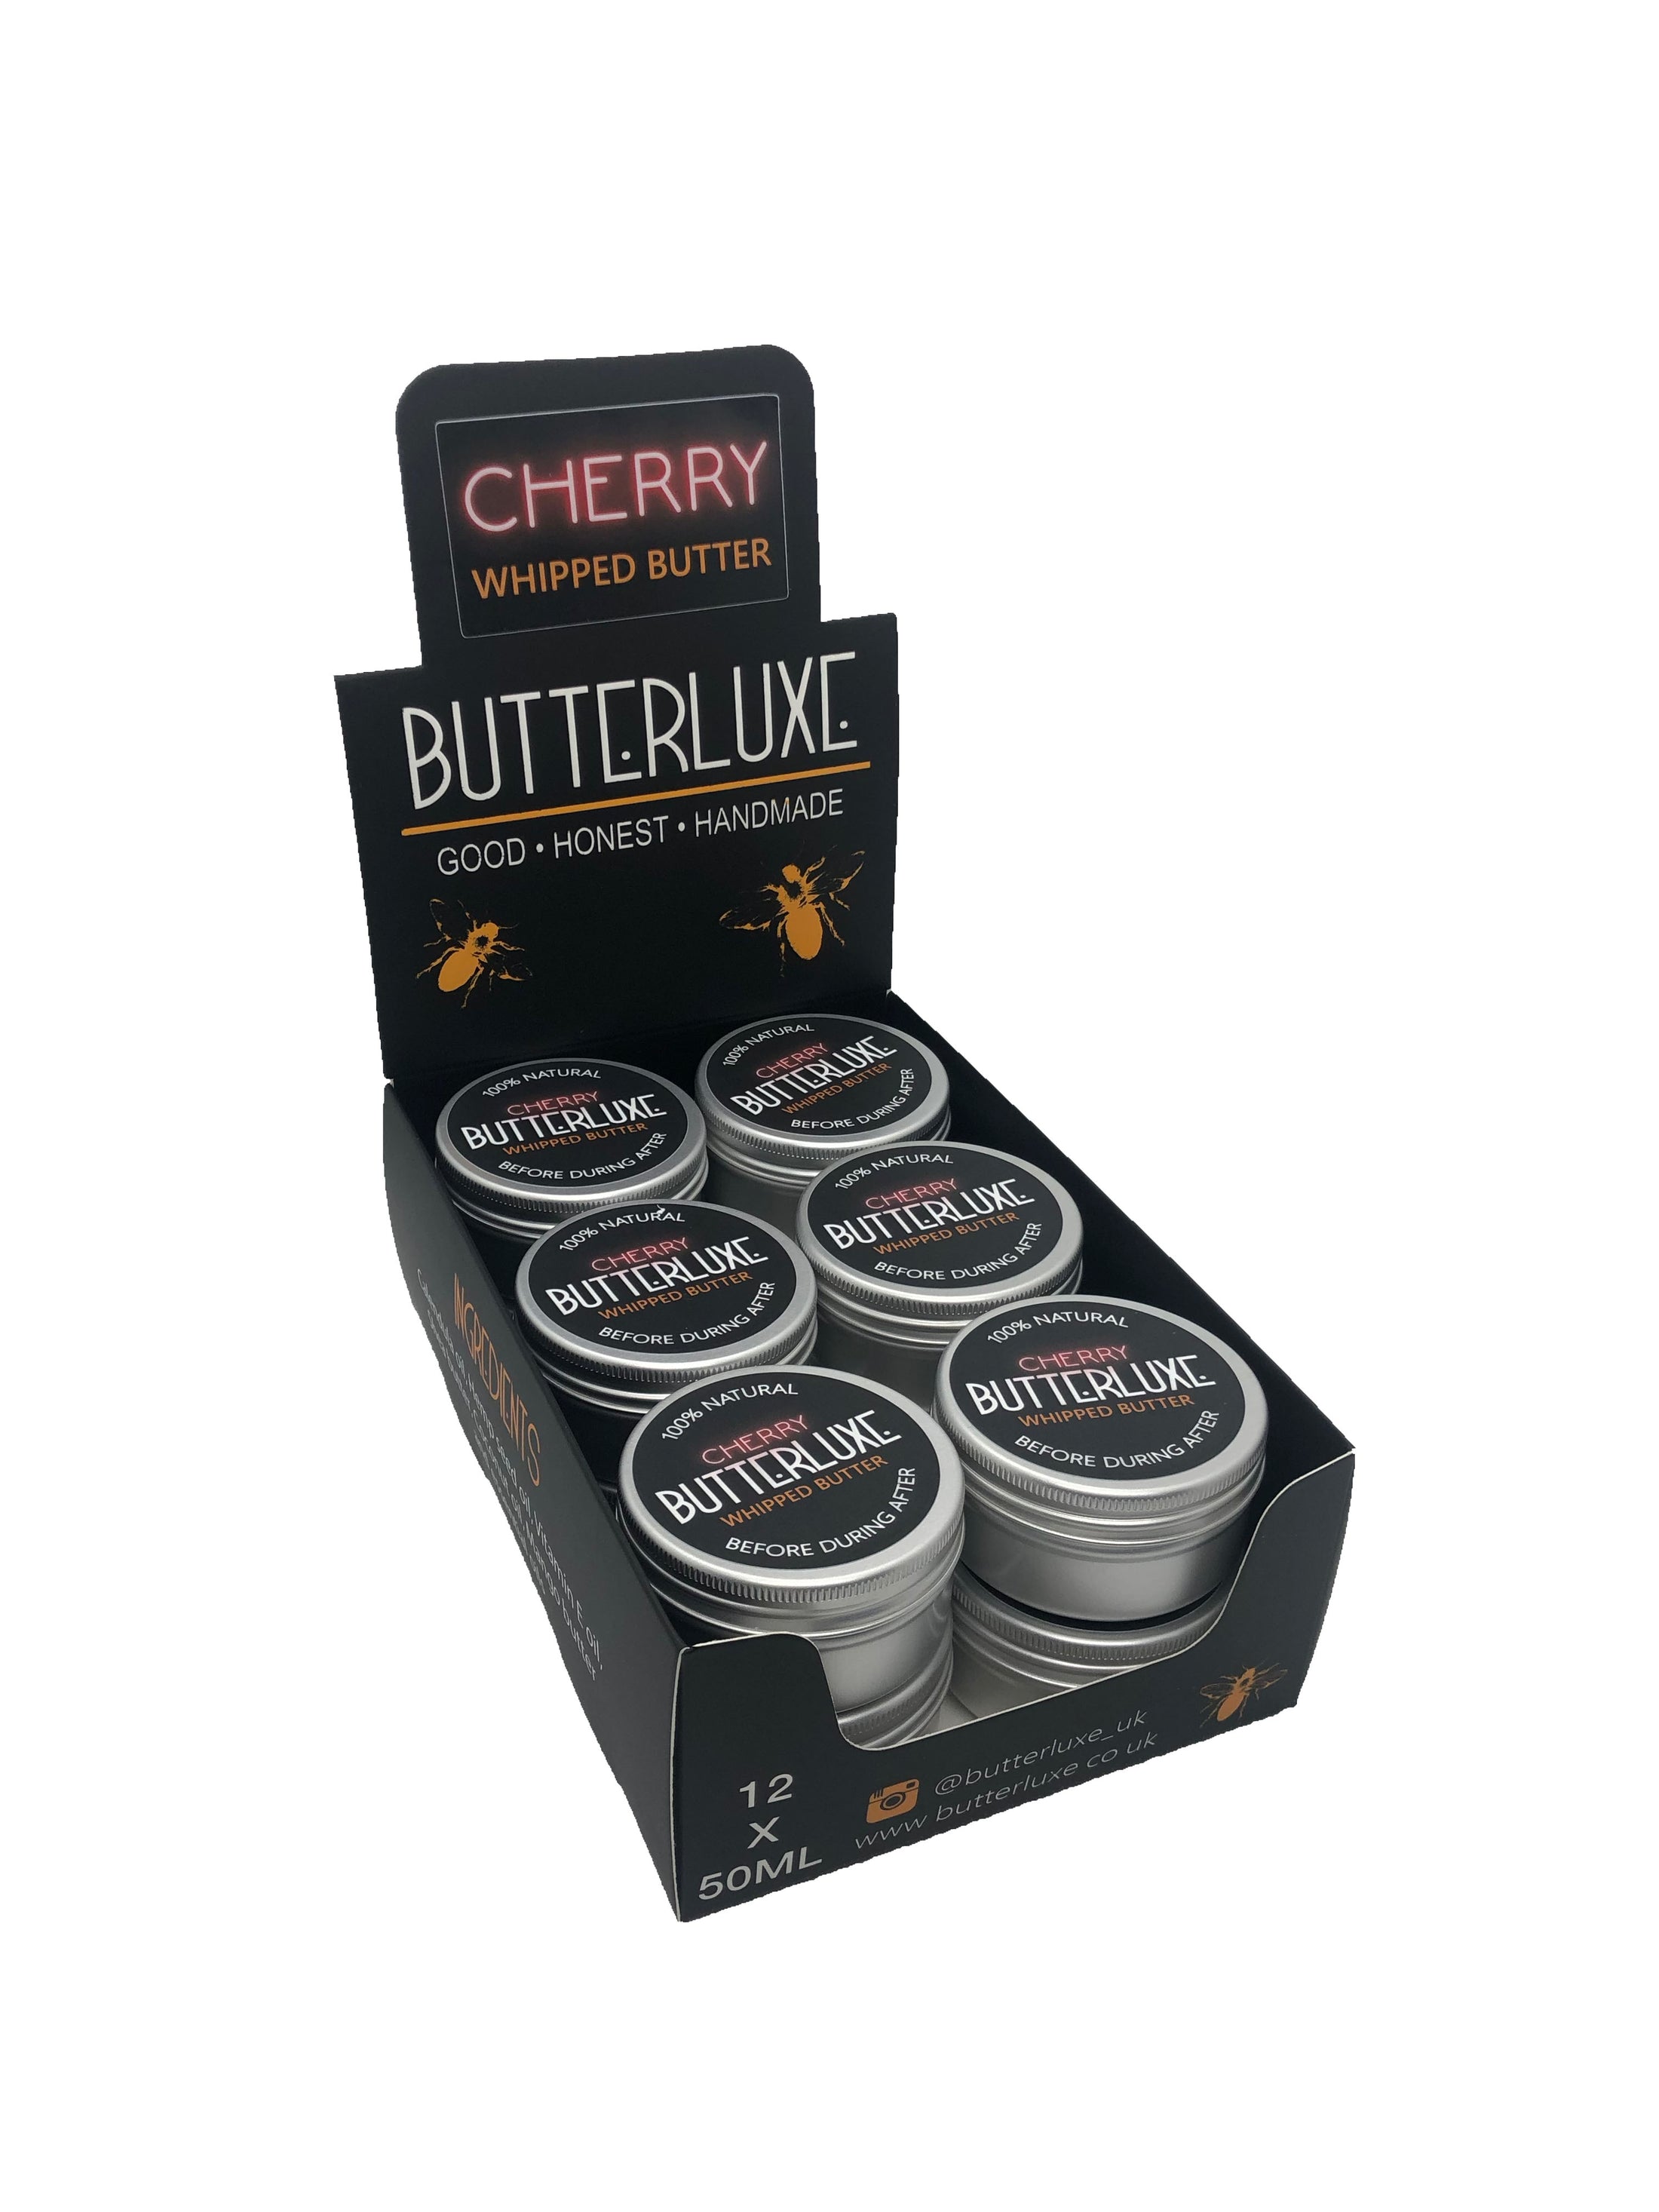 Cherry Whipped Butter